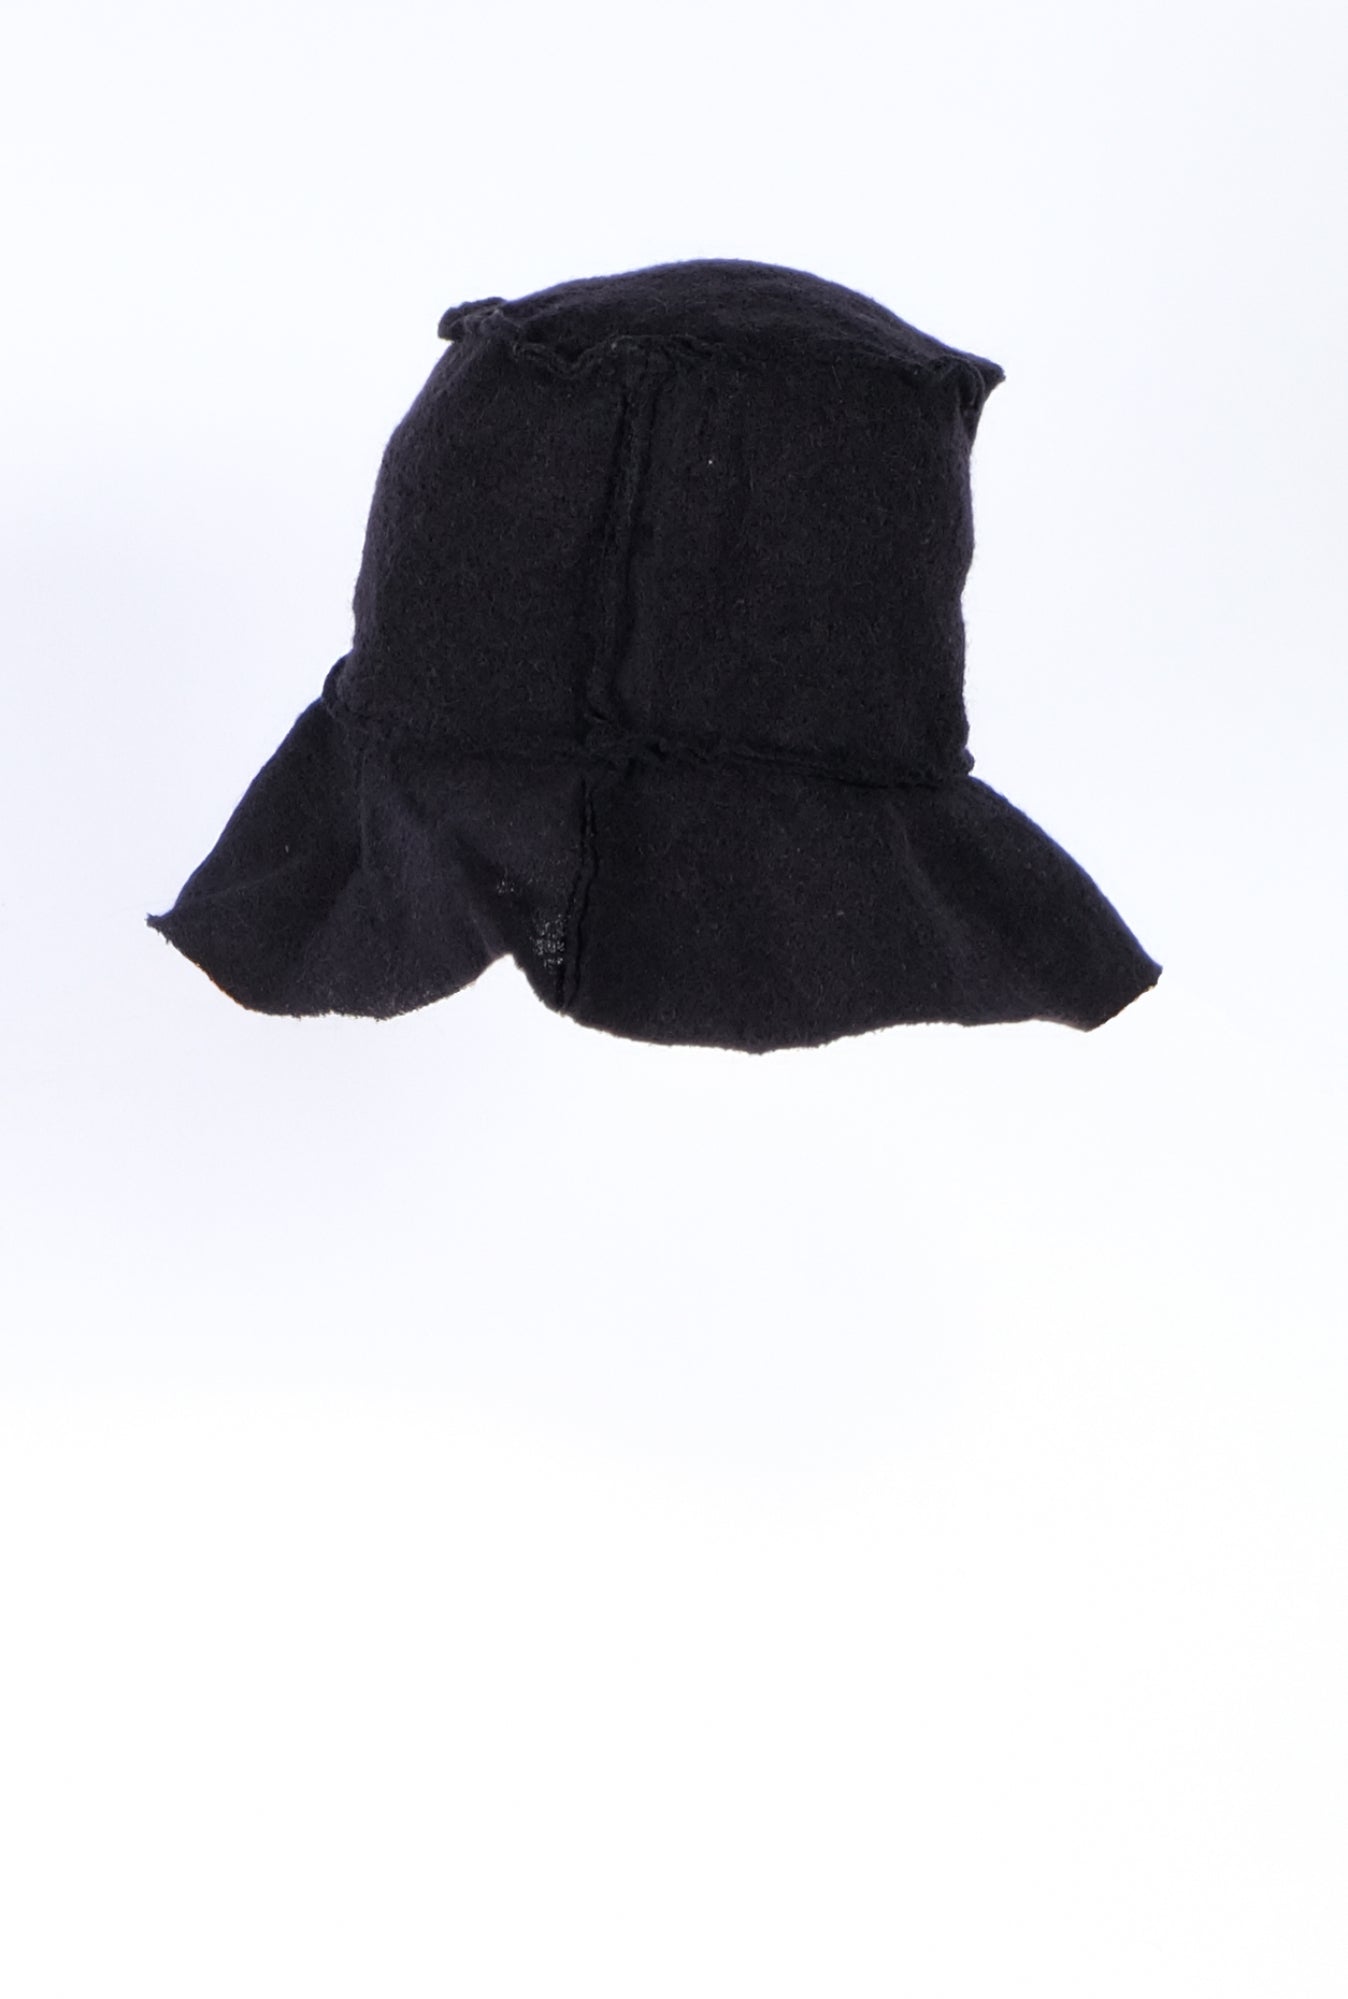 MURRAL Thawing embroidery hat (Black)